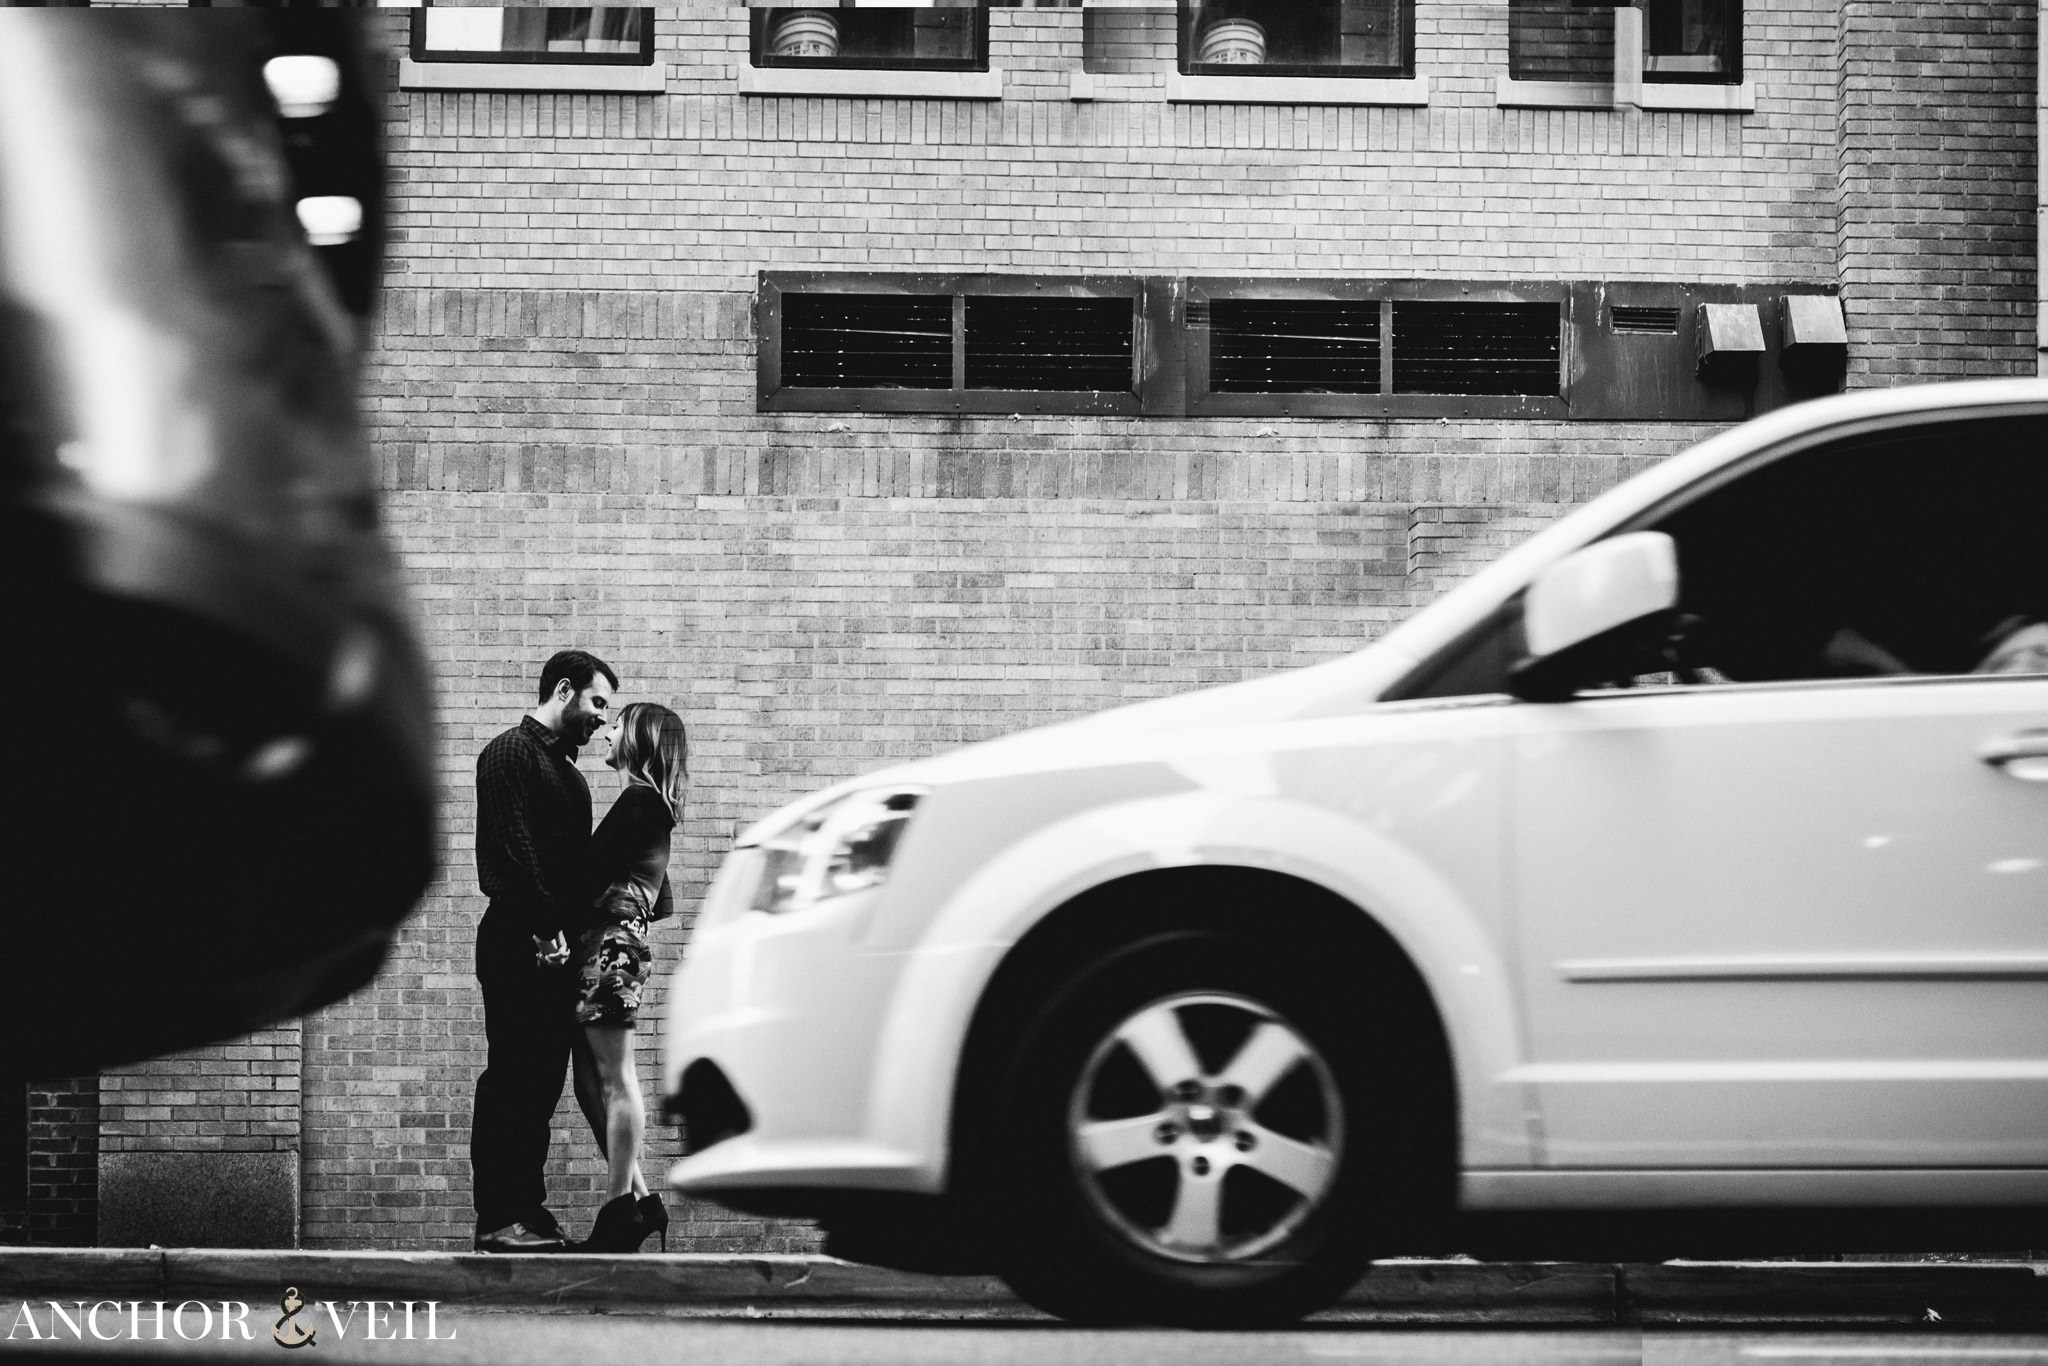 in between the cars as they hold each other during the Uptown Charlotte Engagement Session